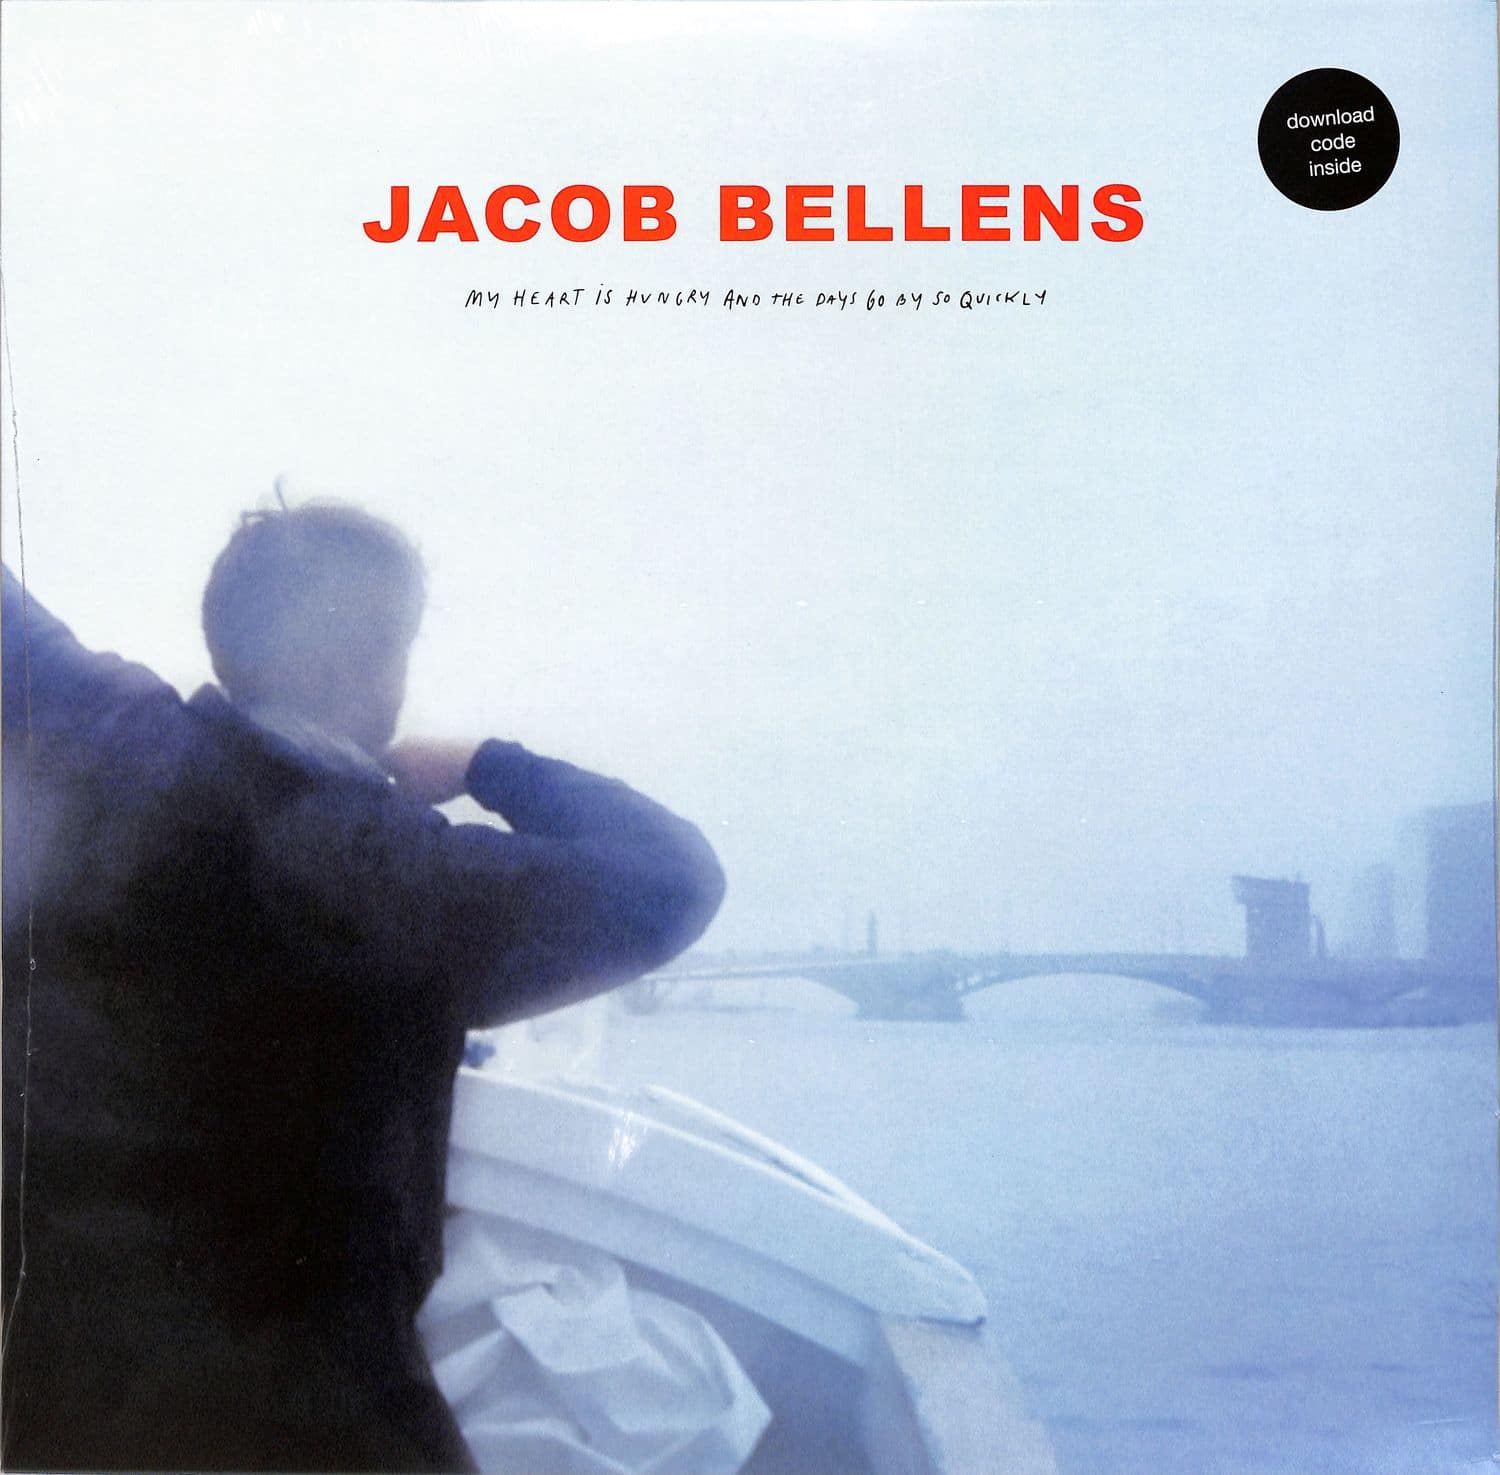 Jacob Bellens - MY HEART IS HUNGRY AND THE DAYS GO BY SO 